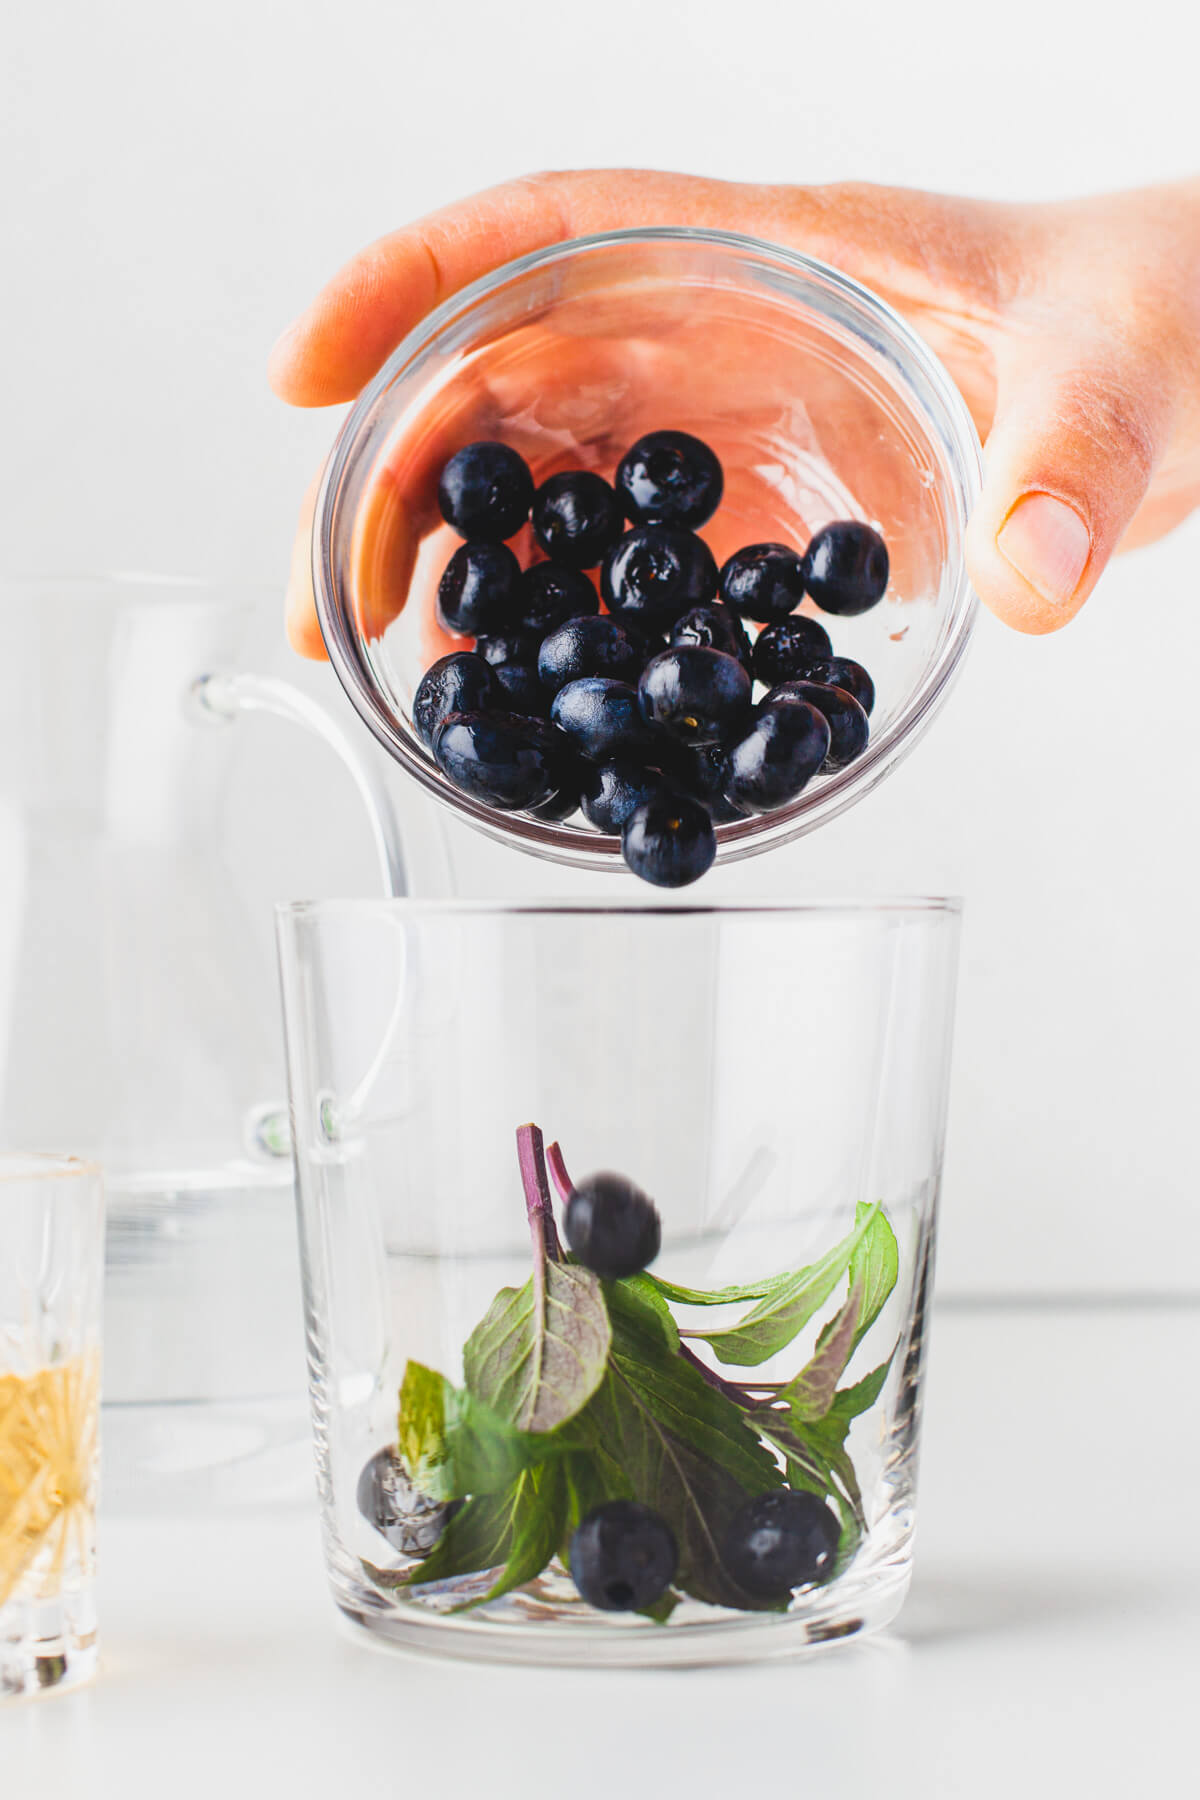 Pouring fresh blueberries into a highball glass.